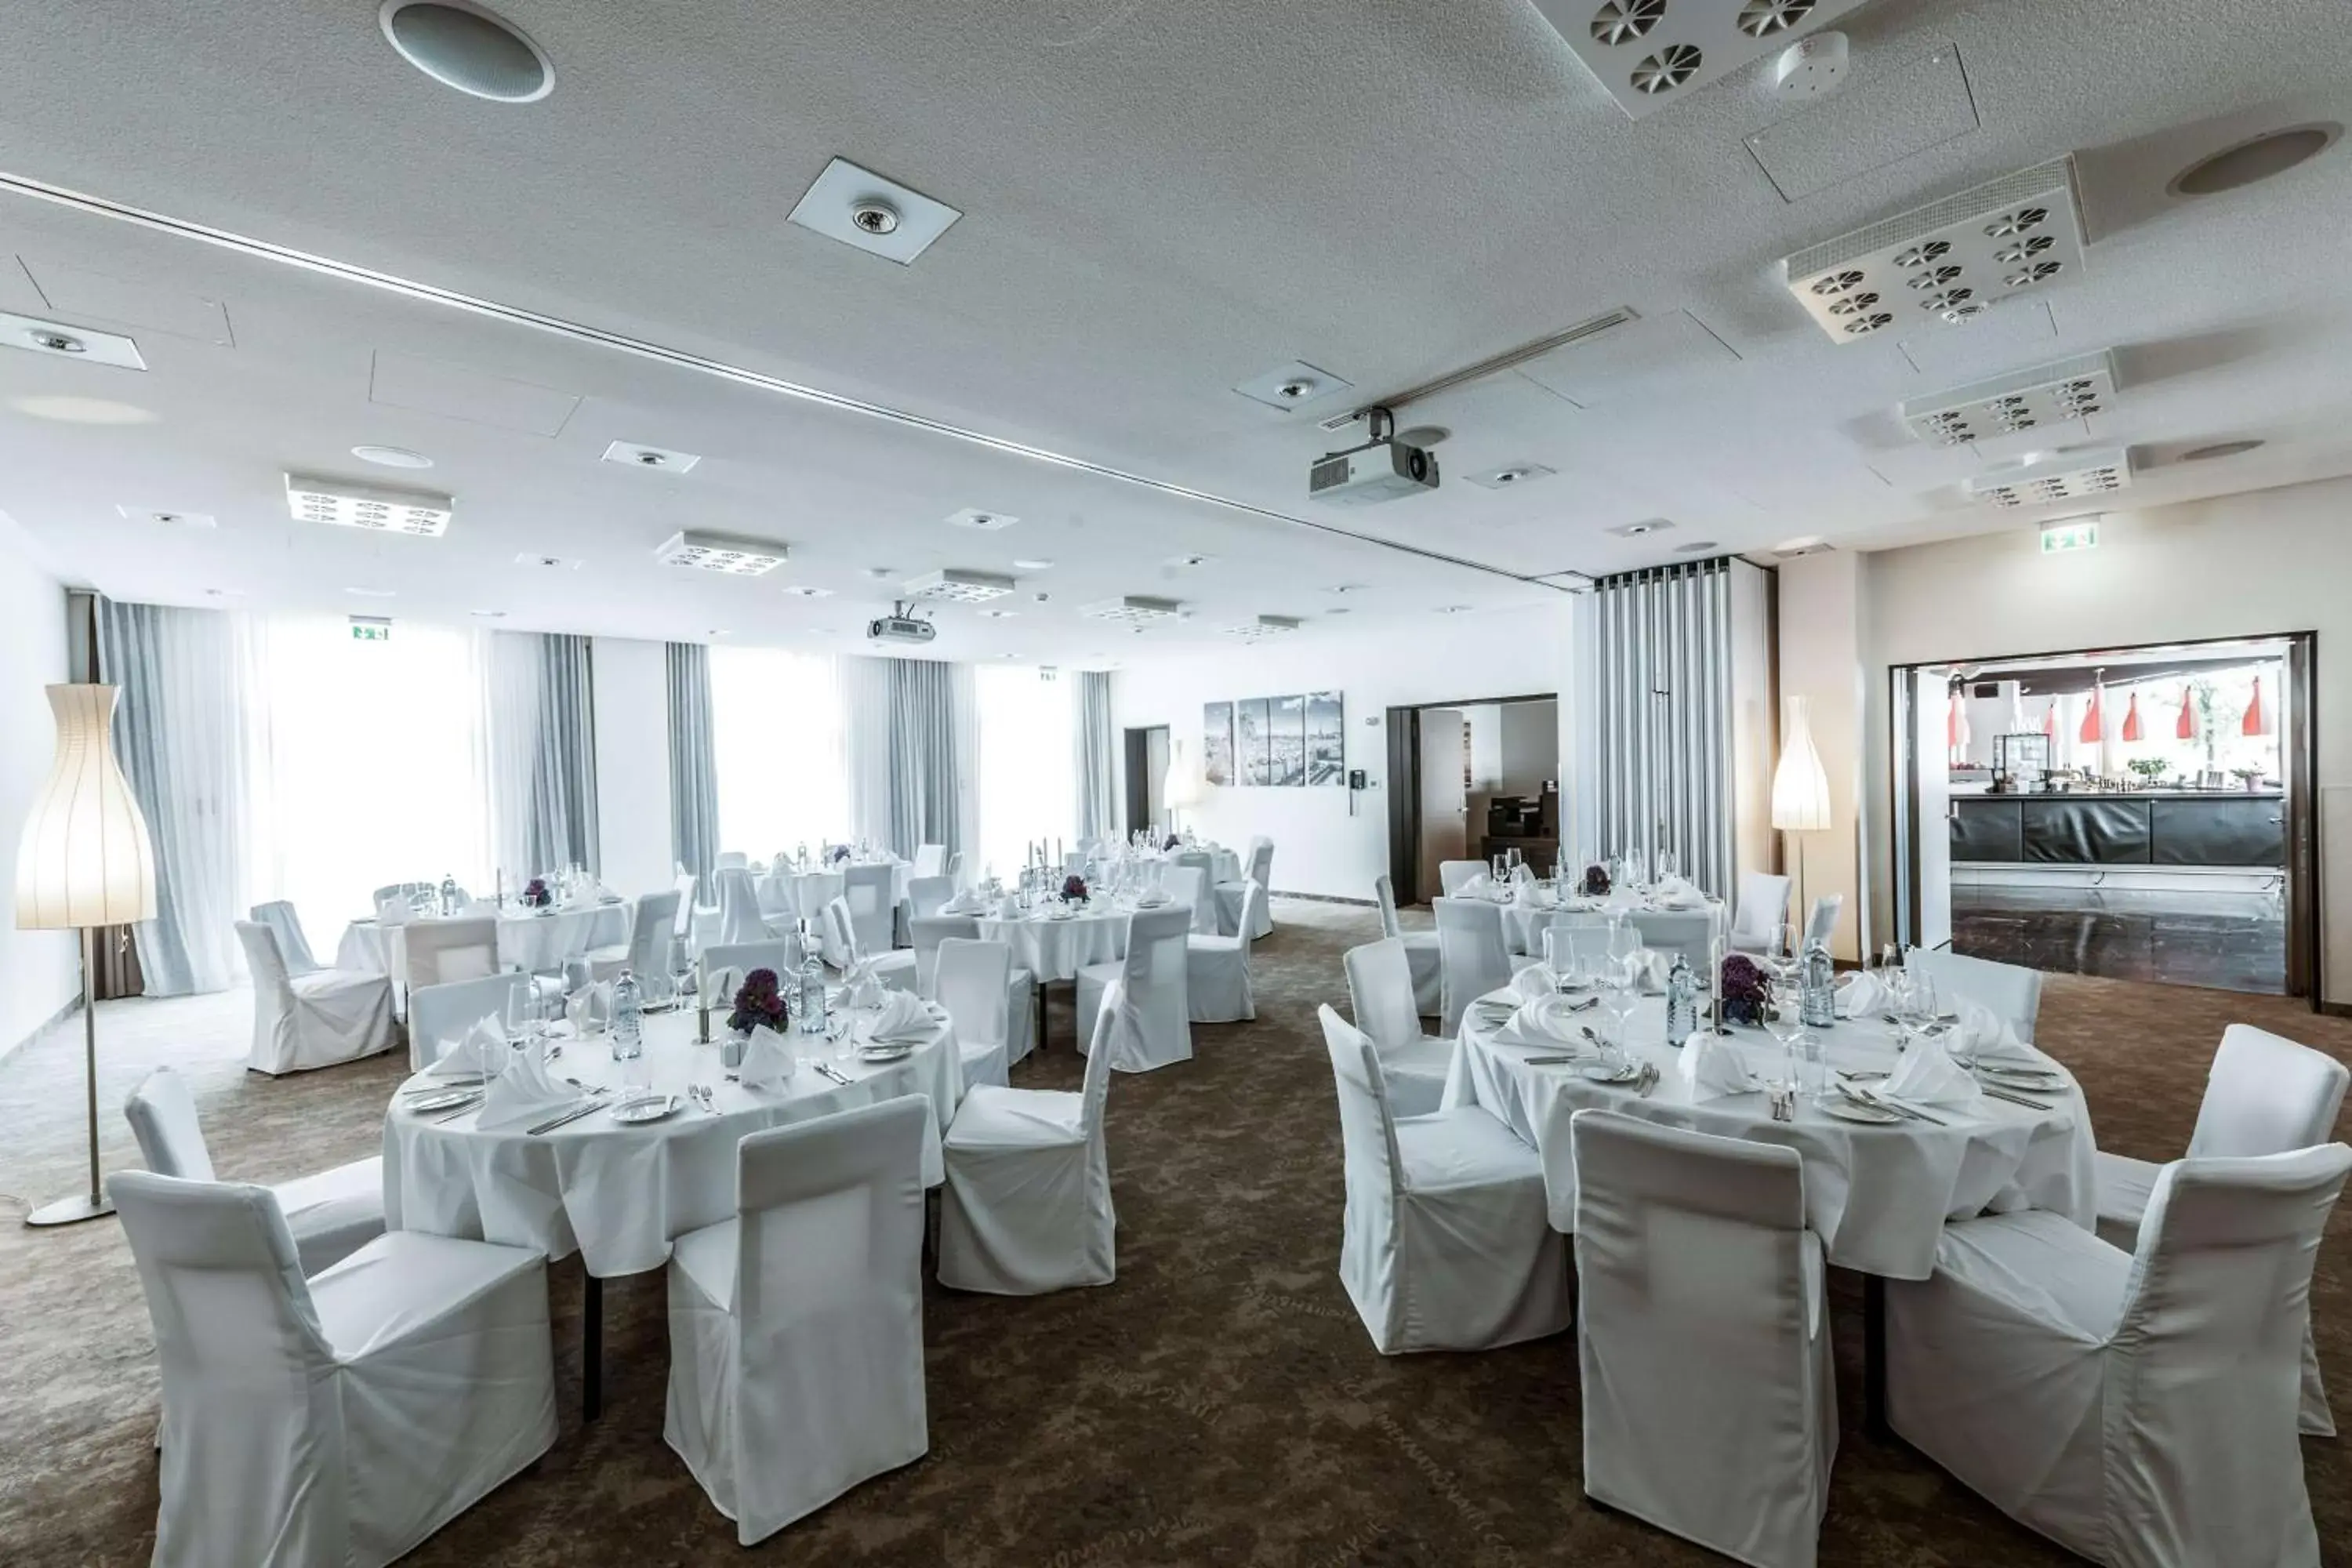 Meeting/conference room, Banquet Facilities in ARCOTEL John F Berlin